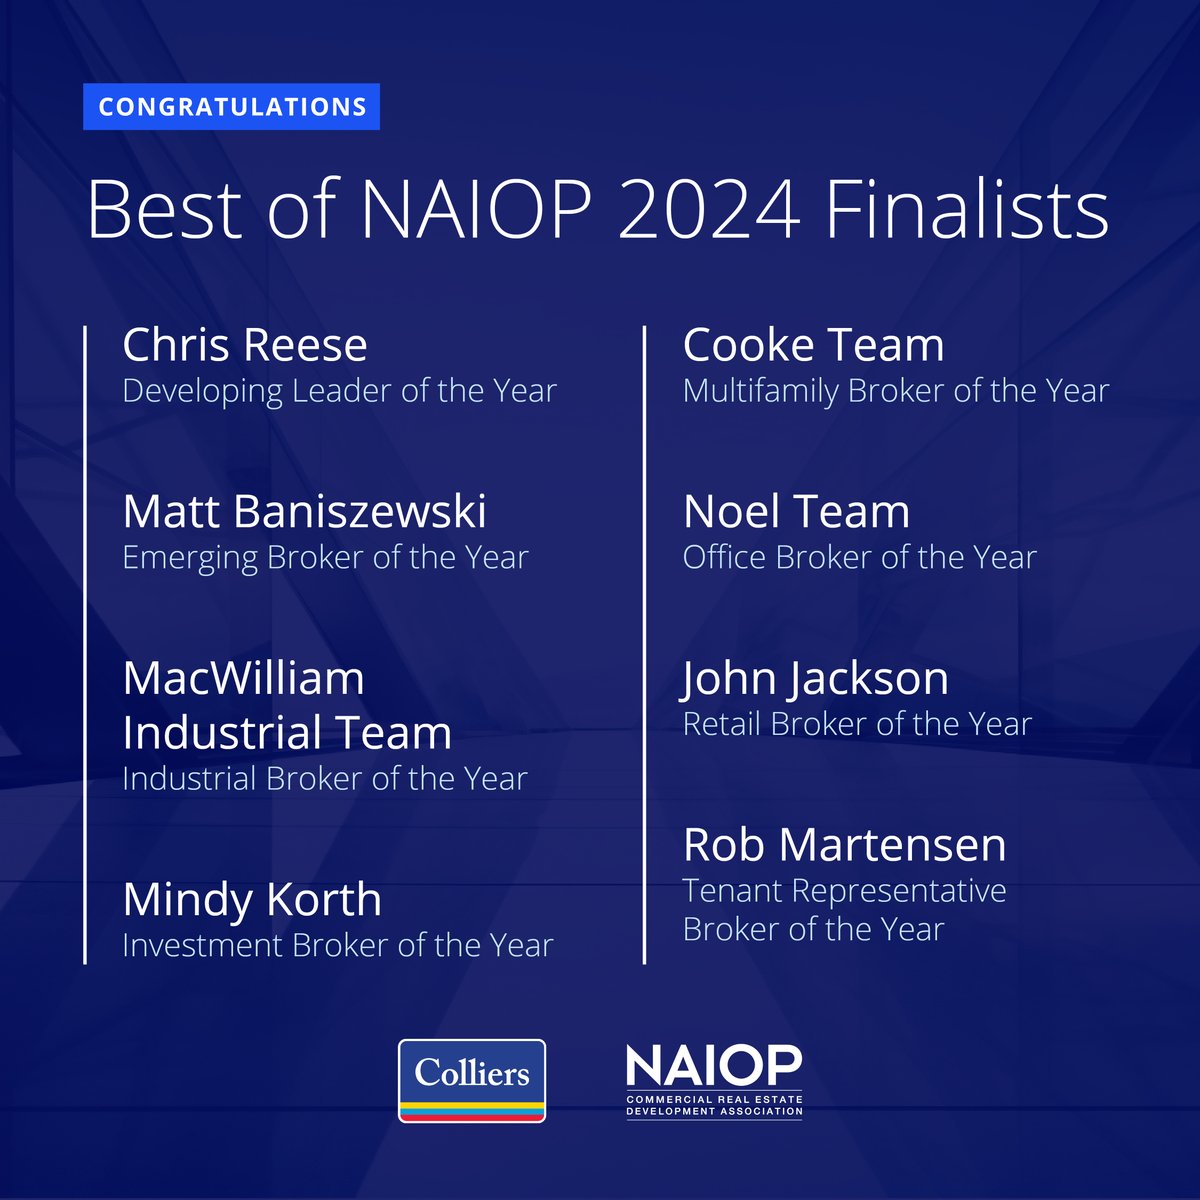 👏 Round of applause for our Best of NAIOP 2024 Finalists in commercial real estate!🌟 These industry leaders are paving the way for excellence and innovation. Here's to celebrating your hard work and accomplishments! 🎉 #BestofNAIOP #CommercialRealEstate #Innovation